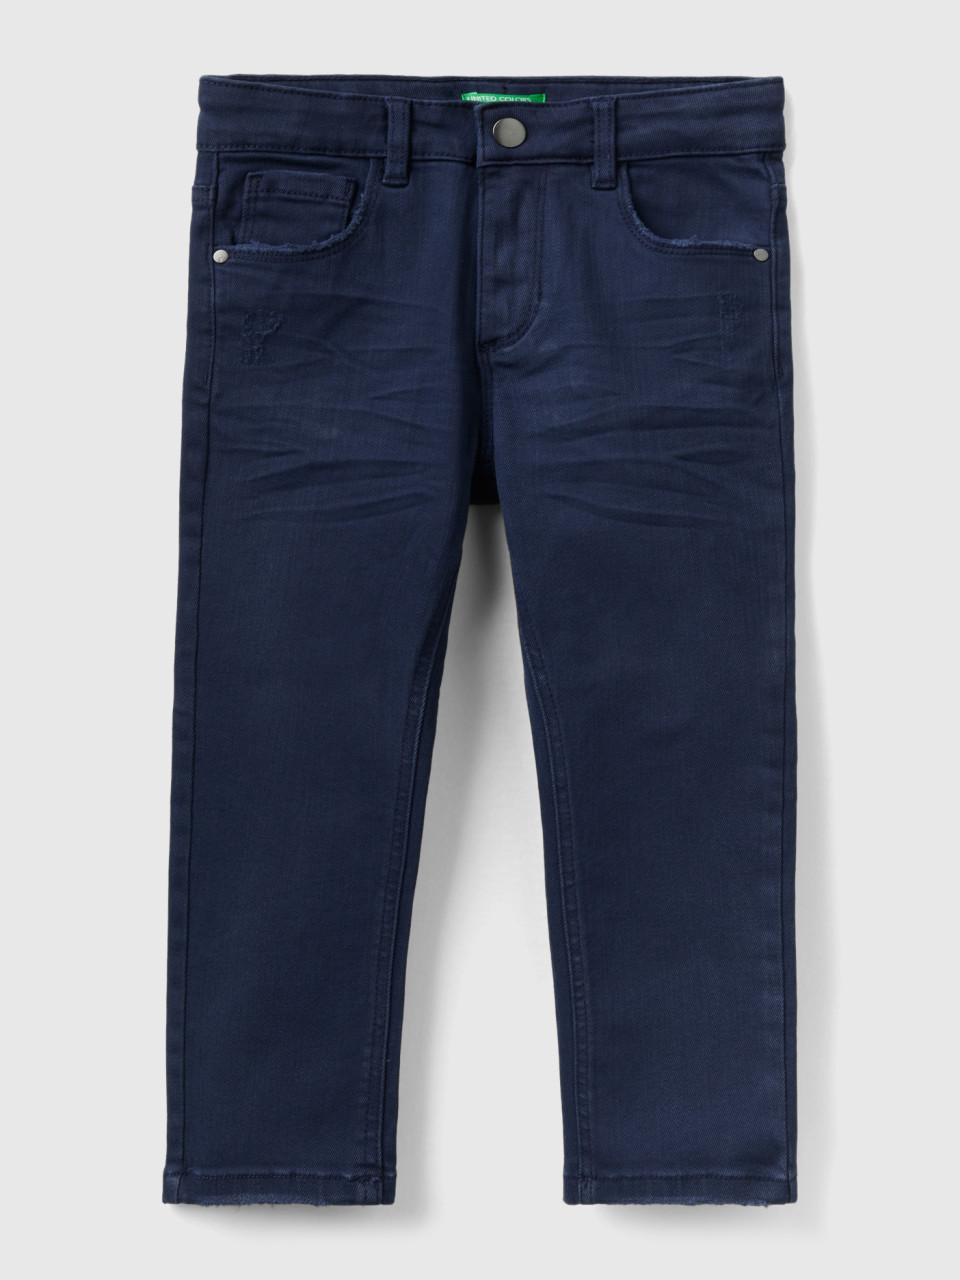 Benetton, Jeans With Small Rips, Dark Blue, Kids